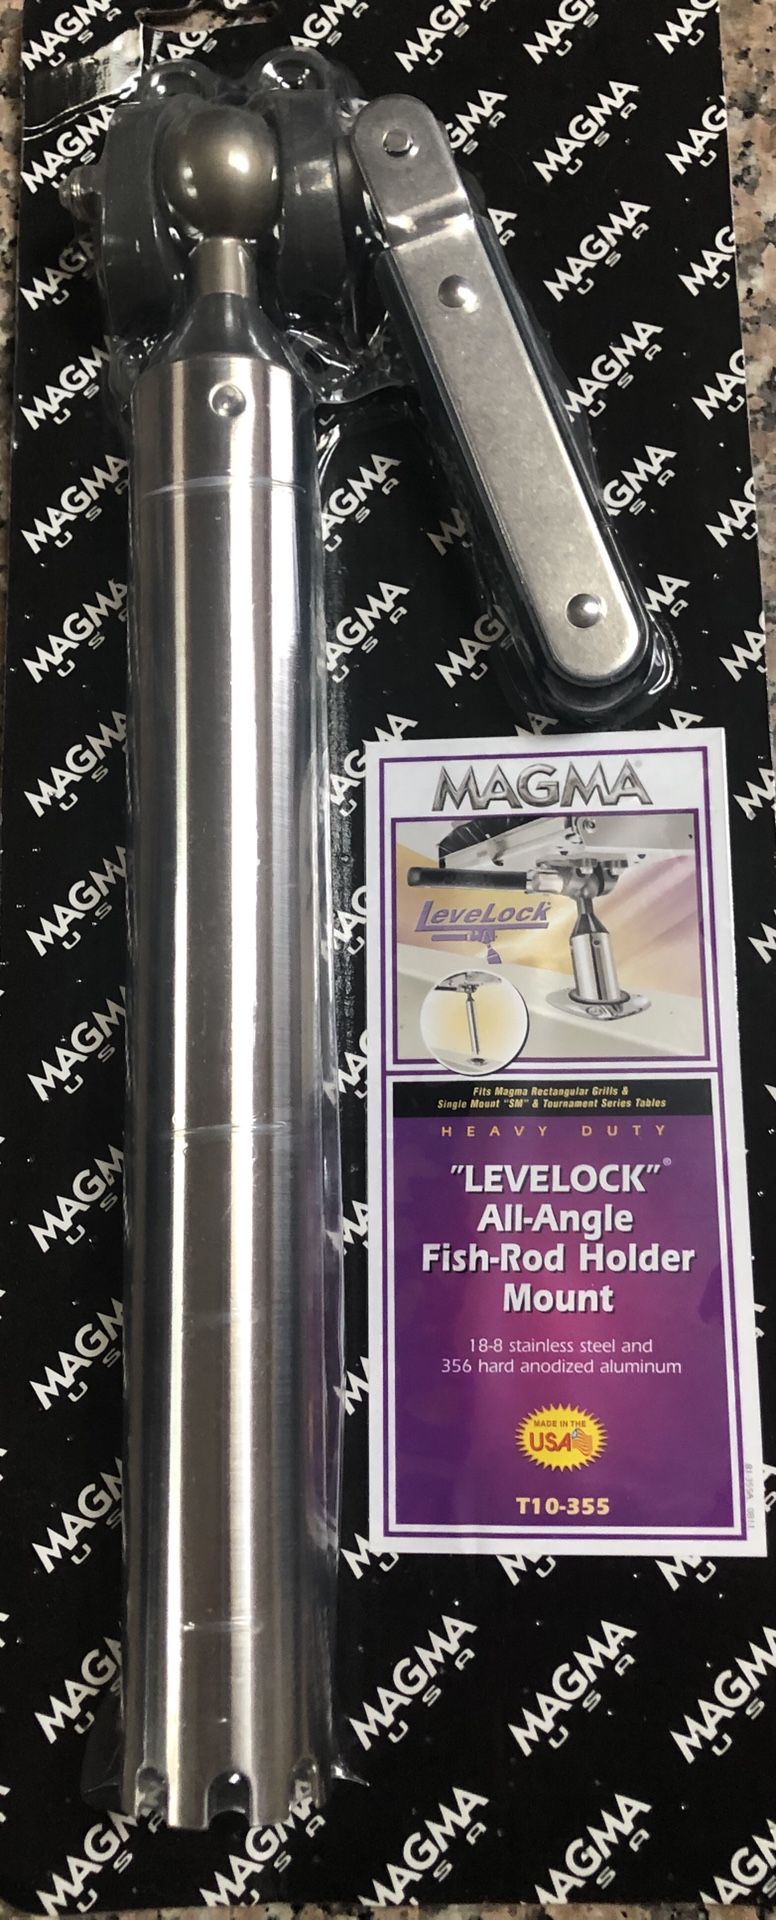 Magma grill fish rod holder mount.